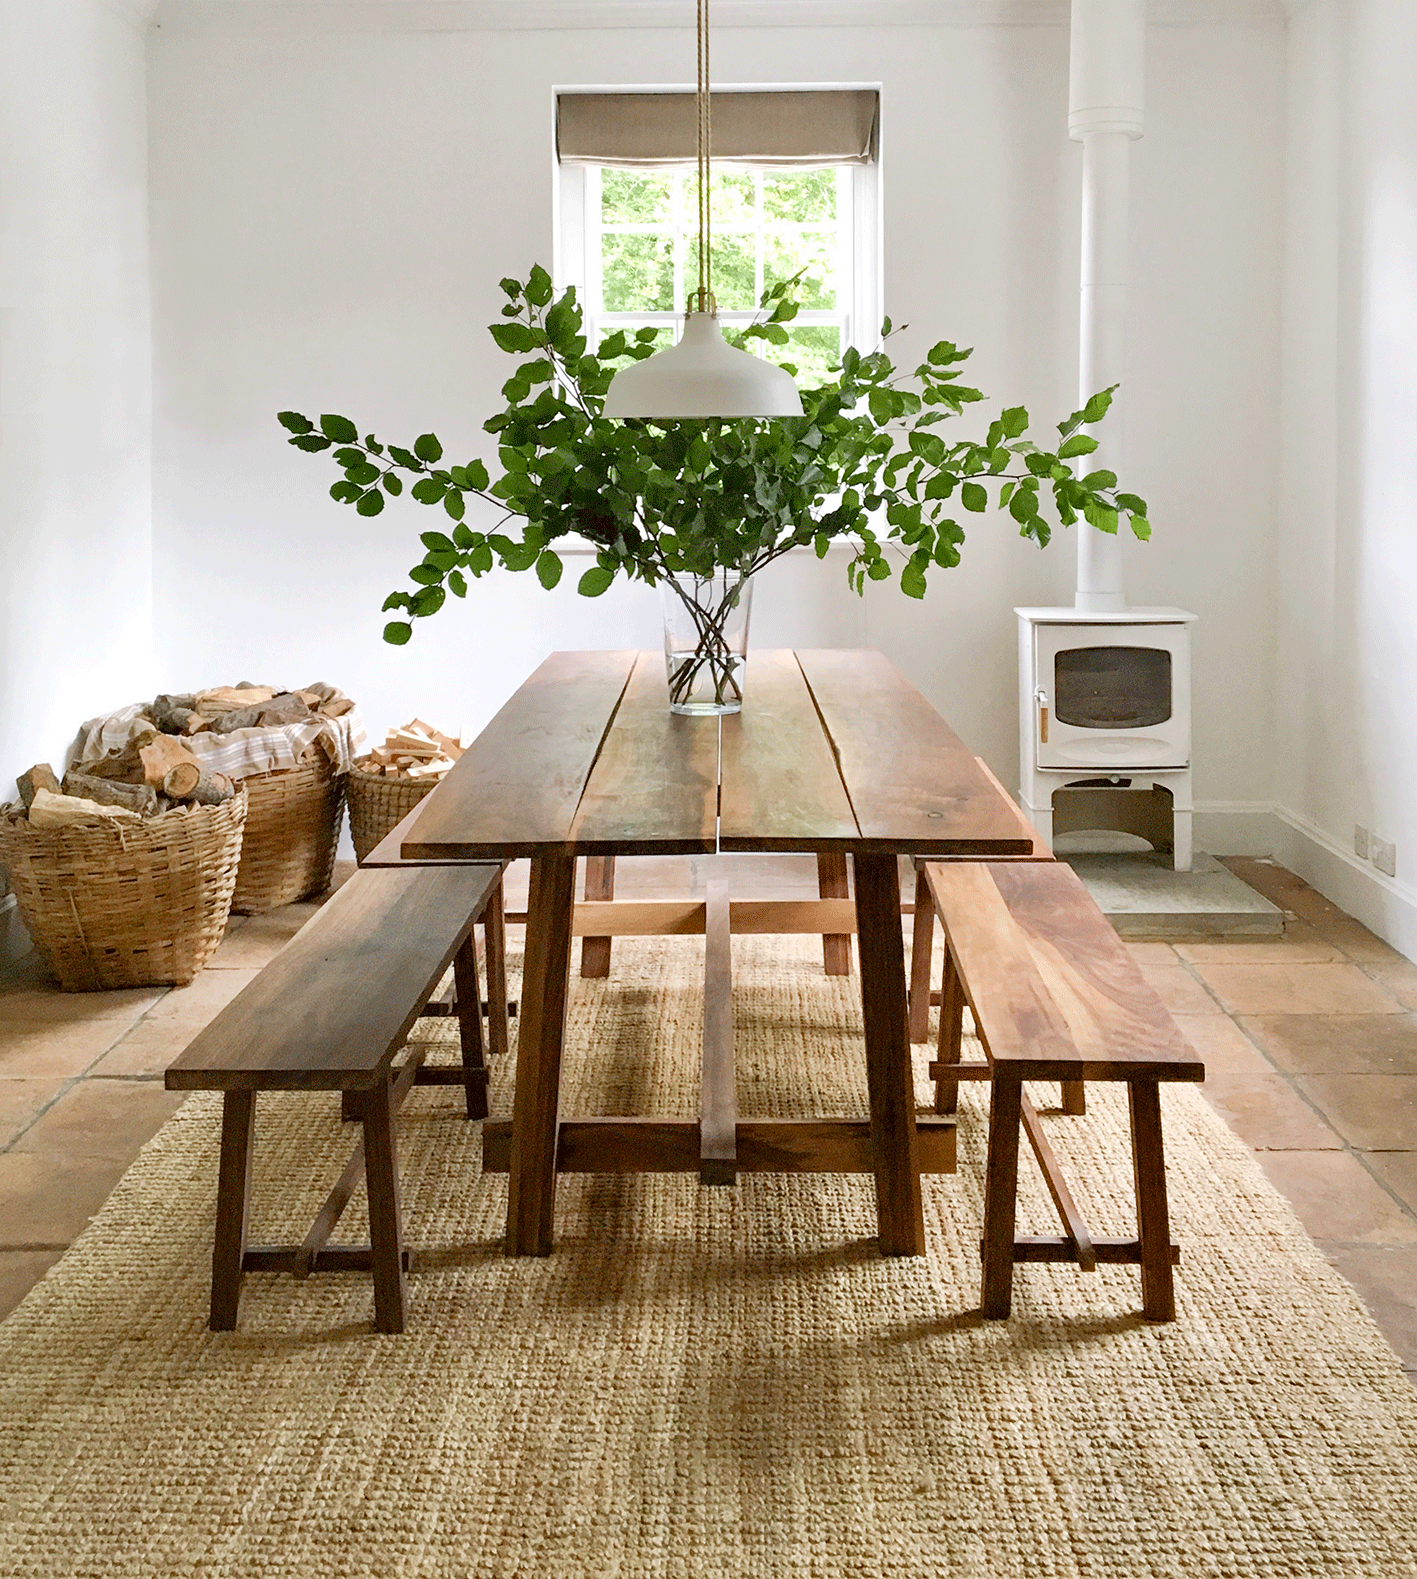 Traditional farmhouse kitchen dining room table. Rustic kitchen table. #farmhous...